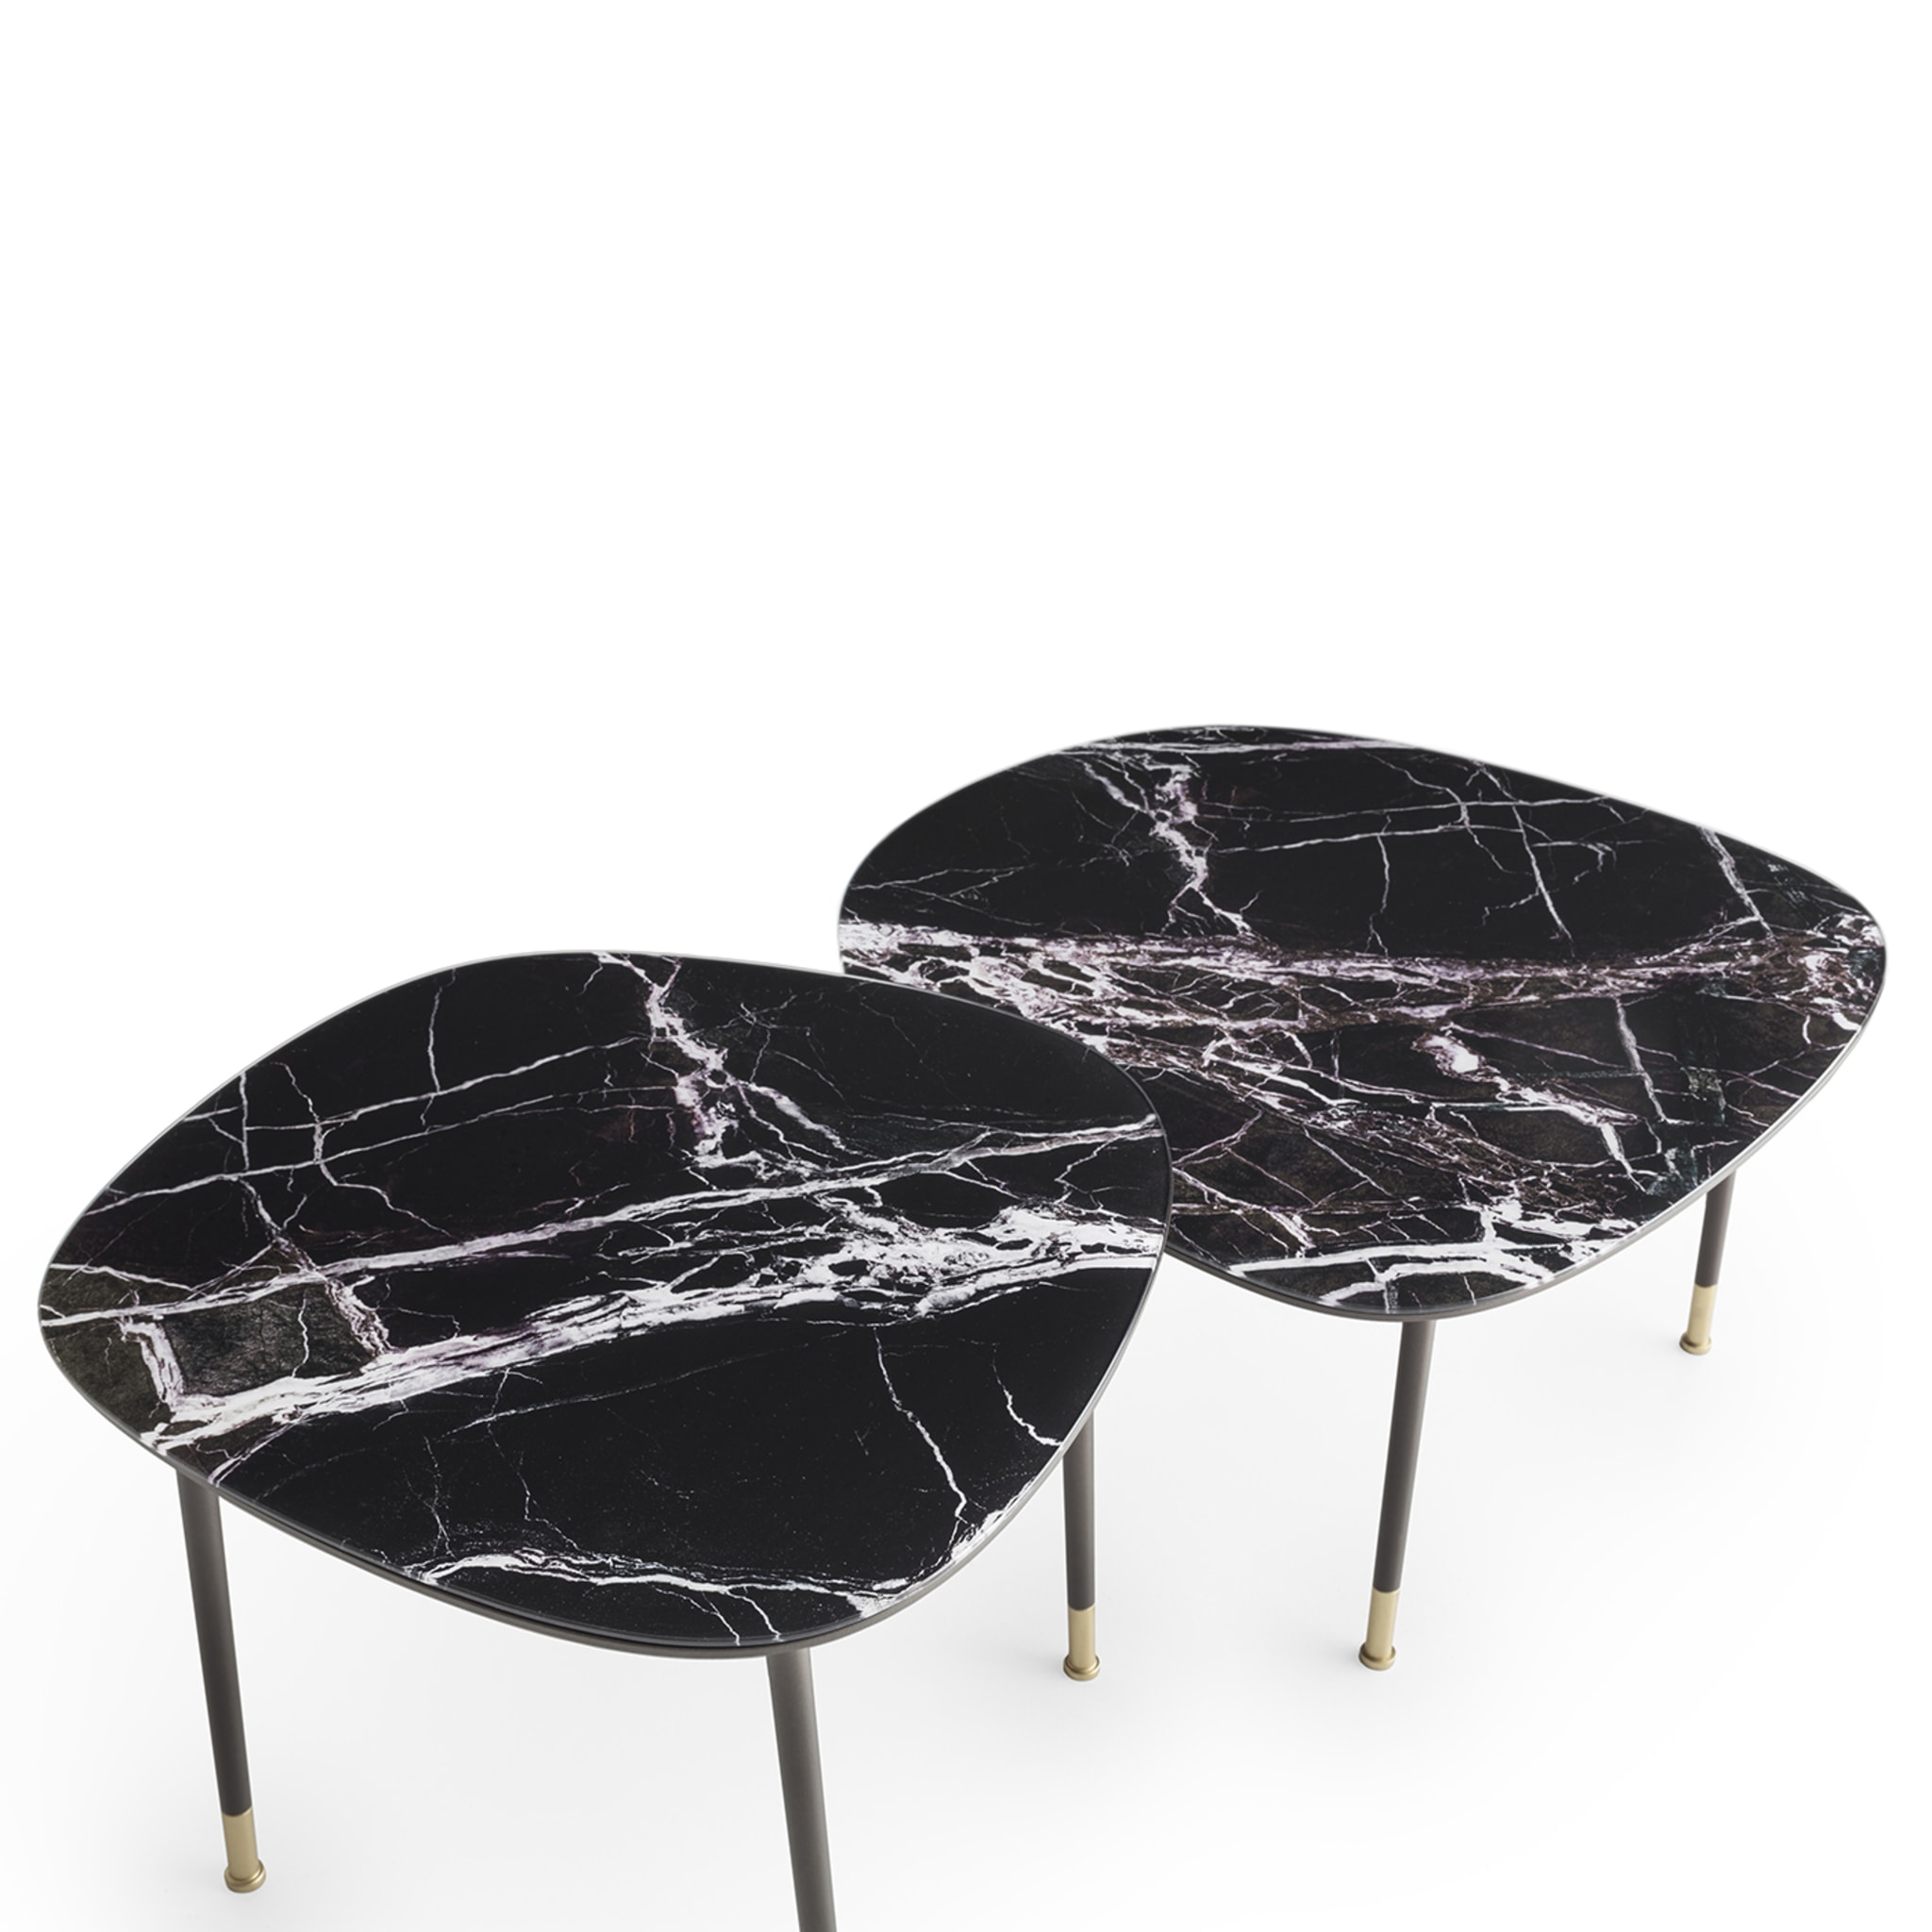 Pebble Large Breccia Imperiale Marble-Effect Coffee Table - Alternative view 2